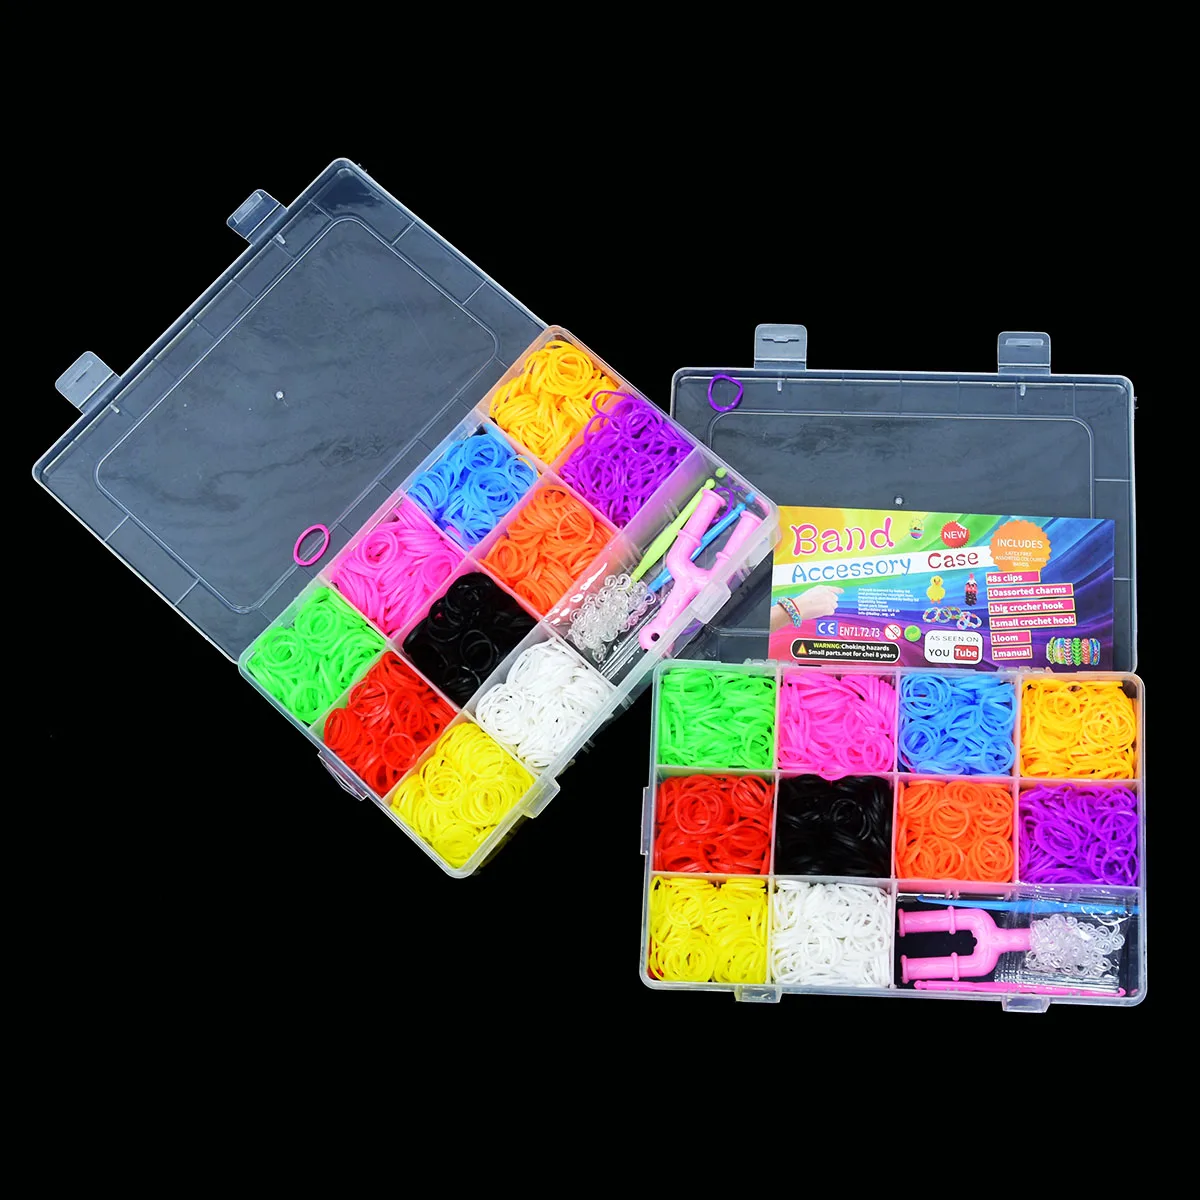 28 Grids Storage Box Rainbow Colorful Loom Rubber Bands DIY weaving  machines Knitting Bracelet Making Kit gifts for Children